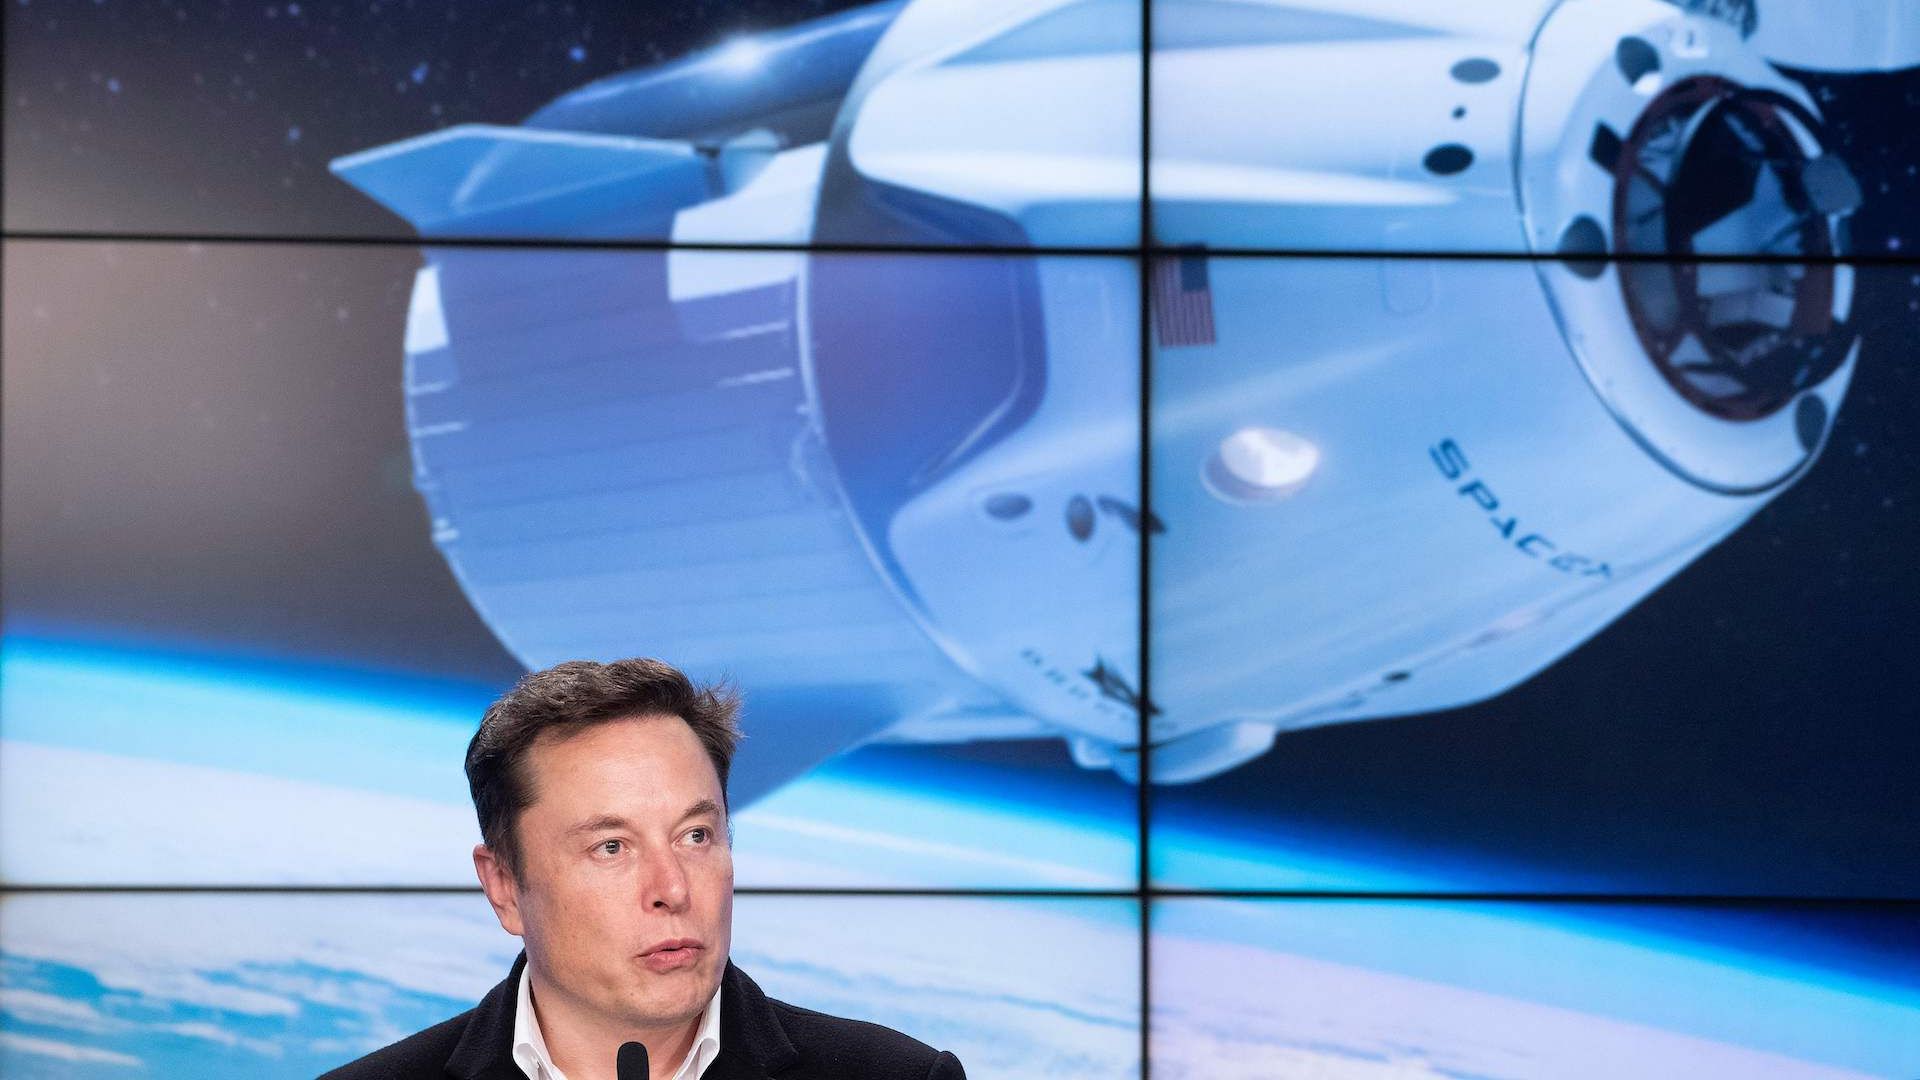 SpaceX CEO Elon Musk holds a press conference about his company's Crew Dragon spacecraft.